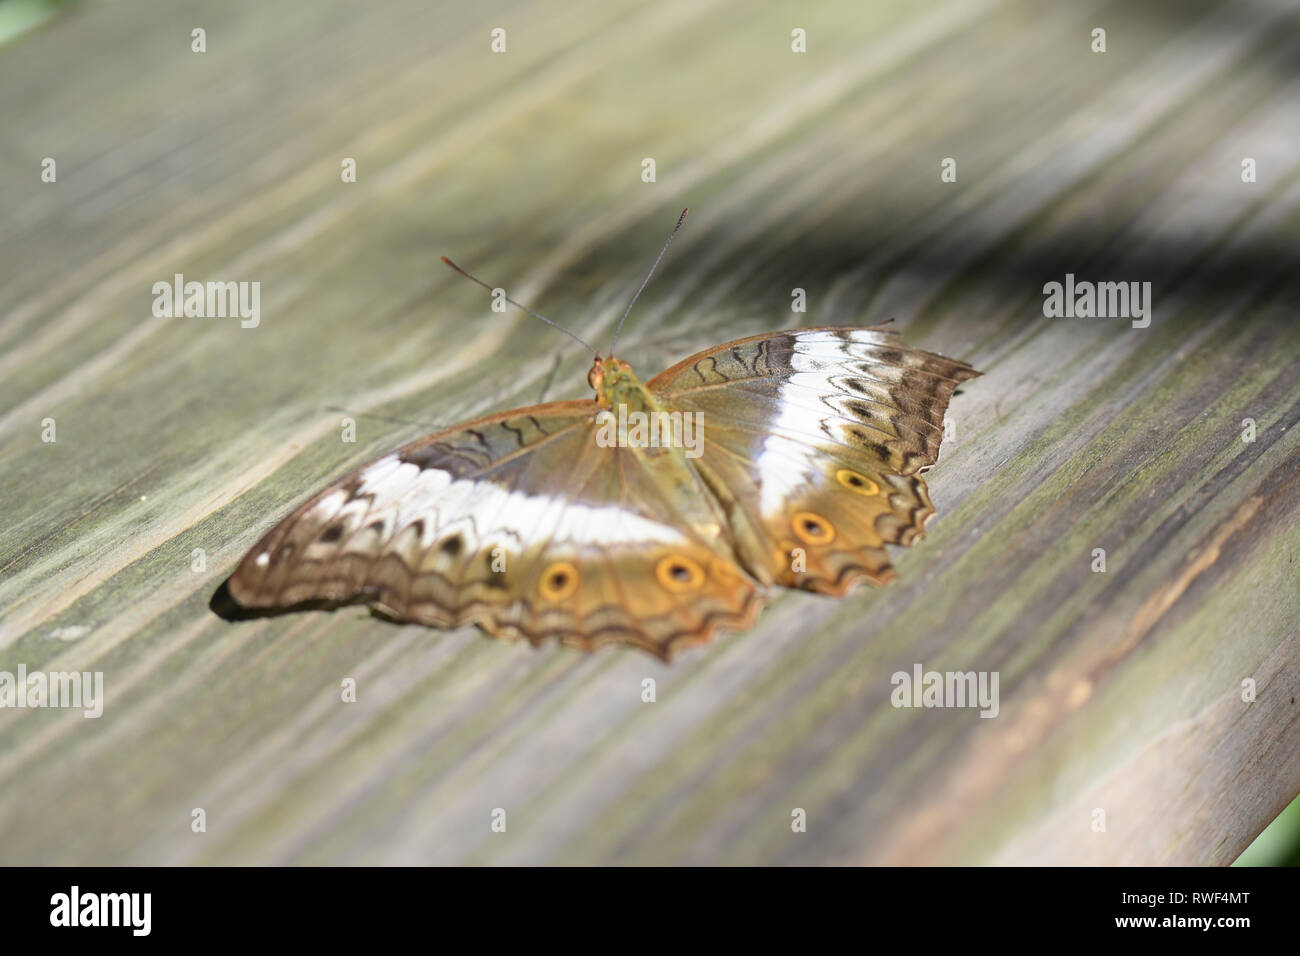 Gold butterfly on a piece of wood in the butterfly rainforest of Gainesville, Florida Stock Photo